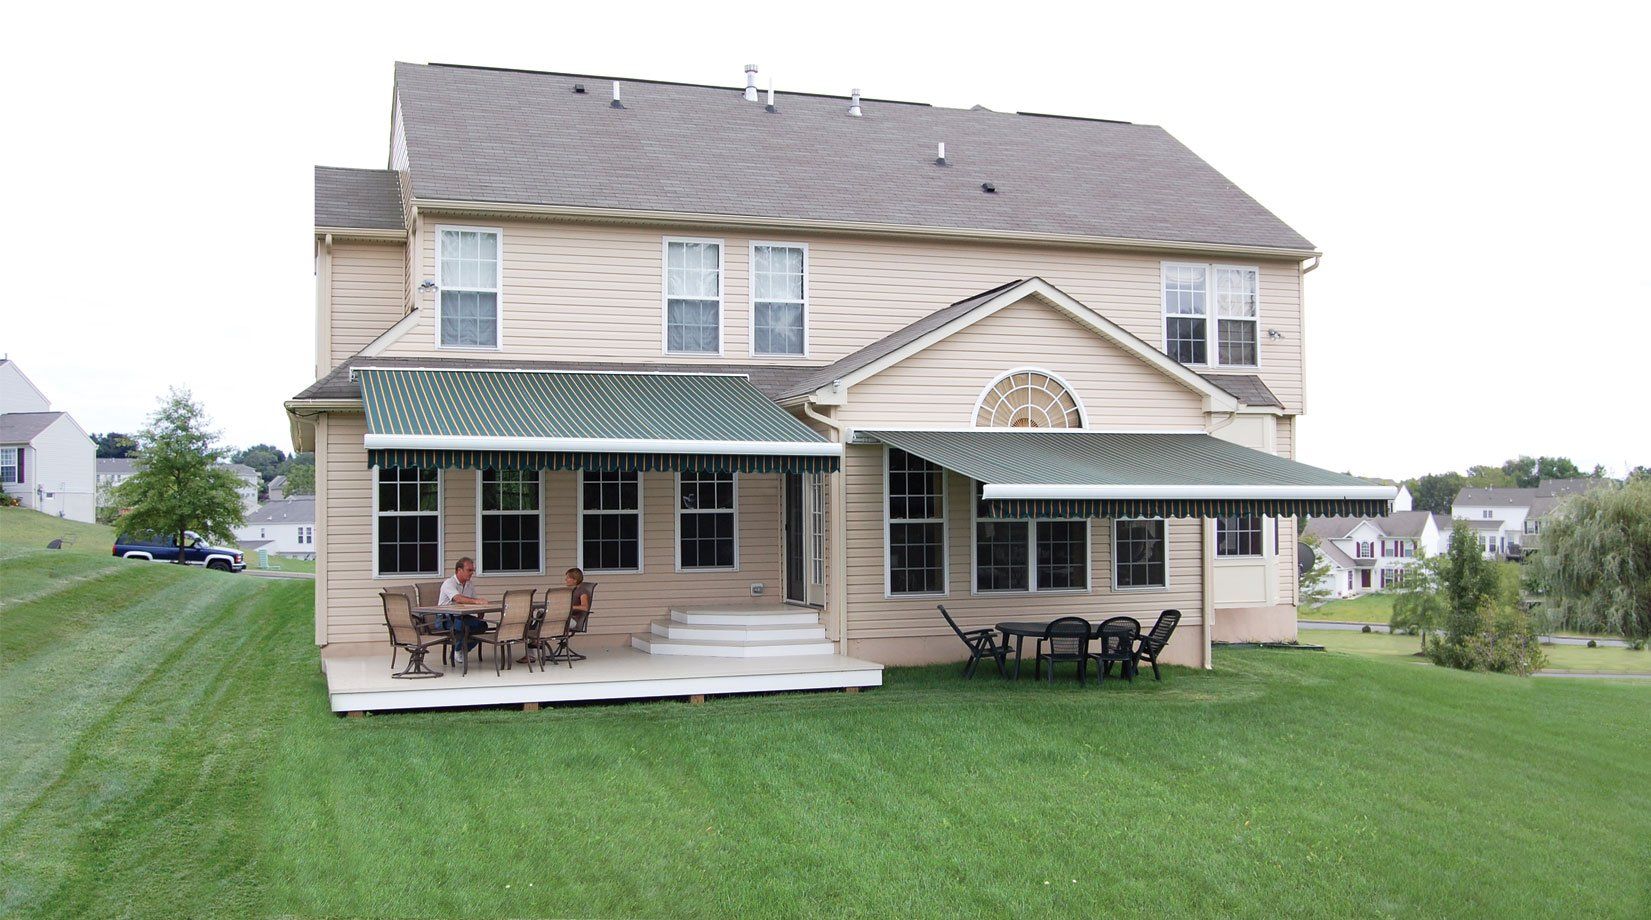 awnings over patio and lawn furniture